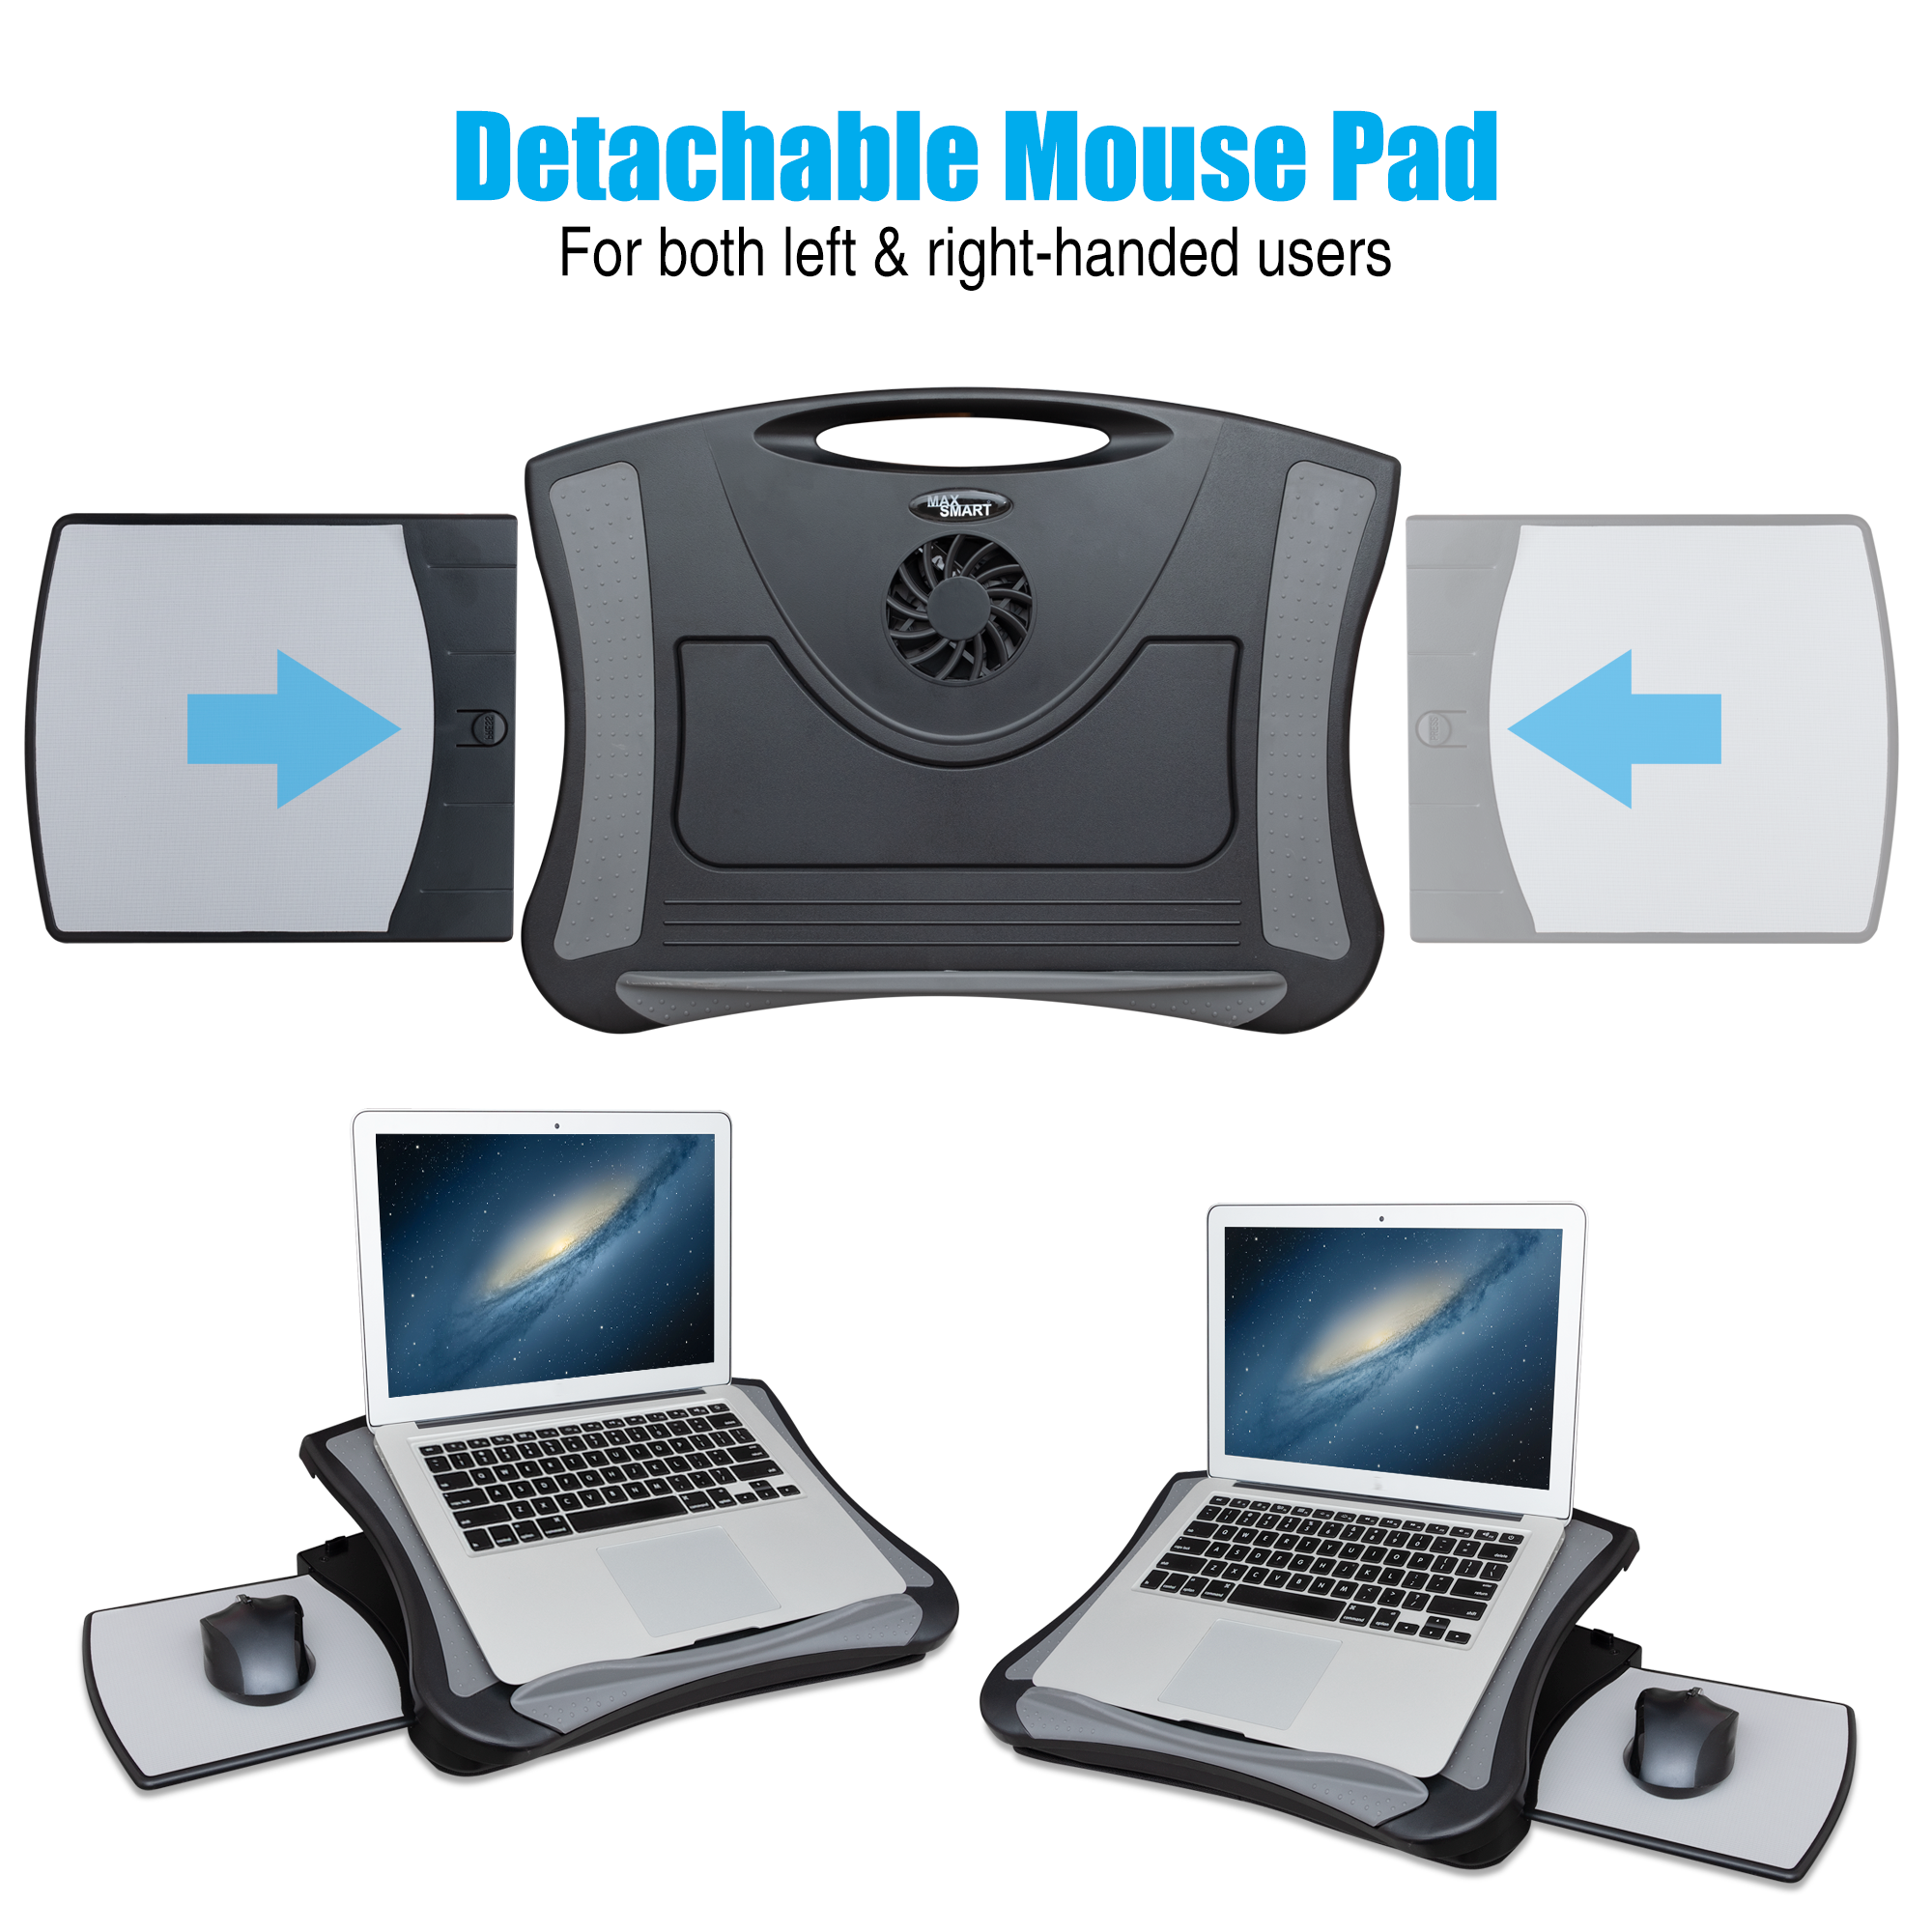 MAX SMART Laptop Lap Desk with Adjustable Angles, Detachable Mouse Pad, USB Fan, and Cushion - image 3 of 7